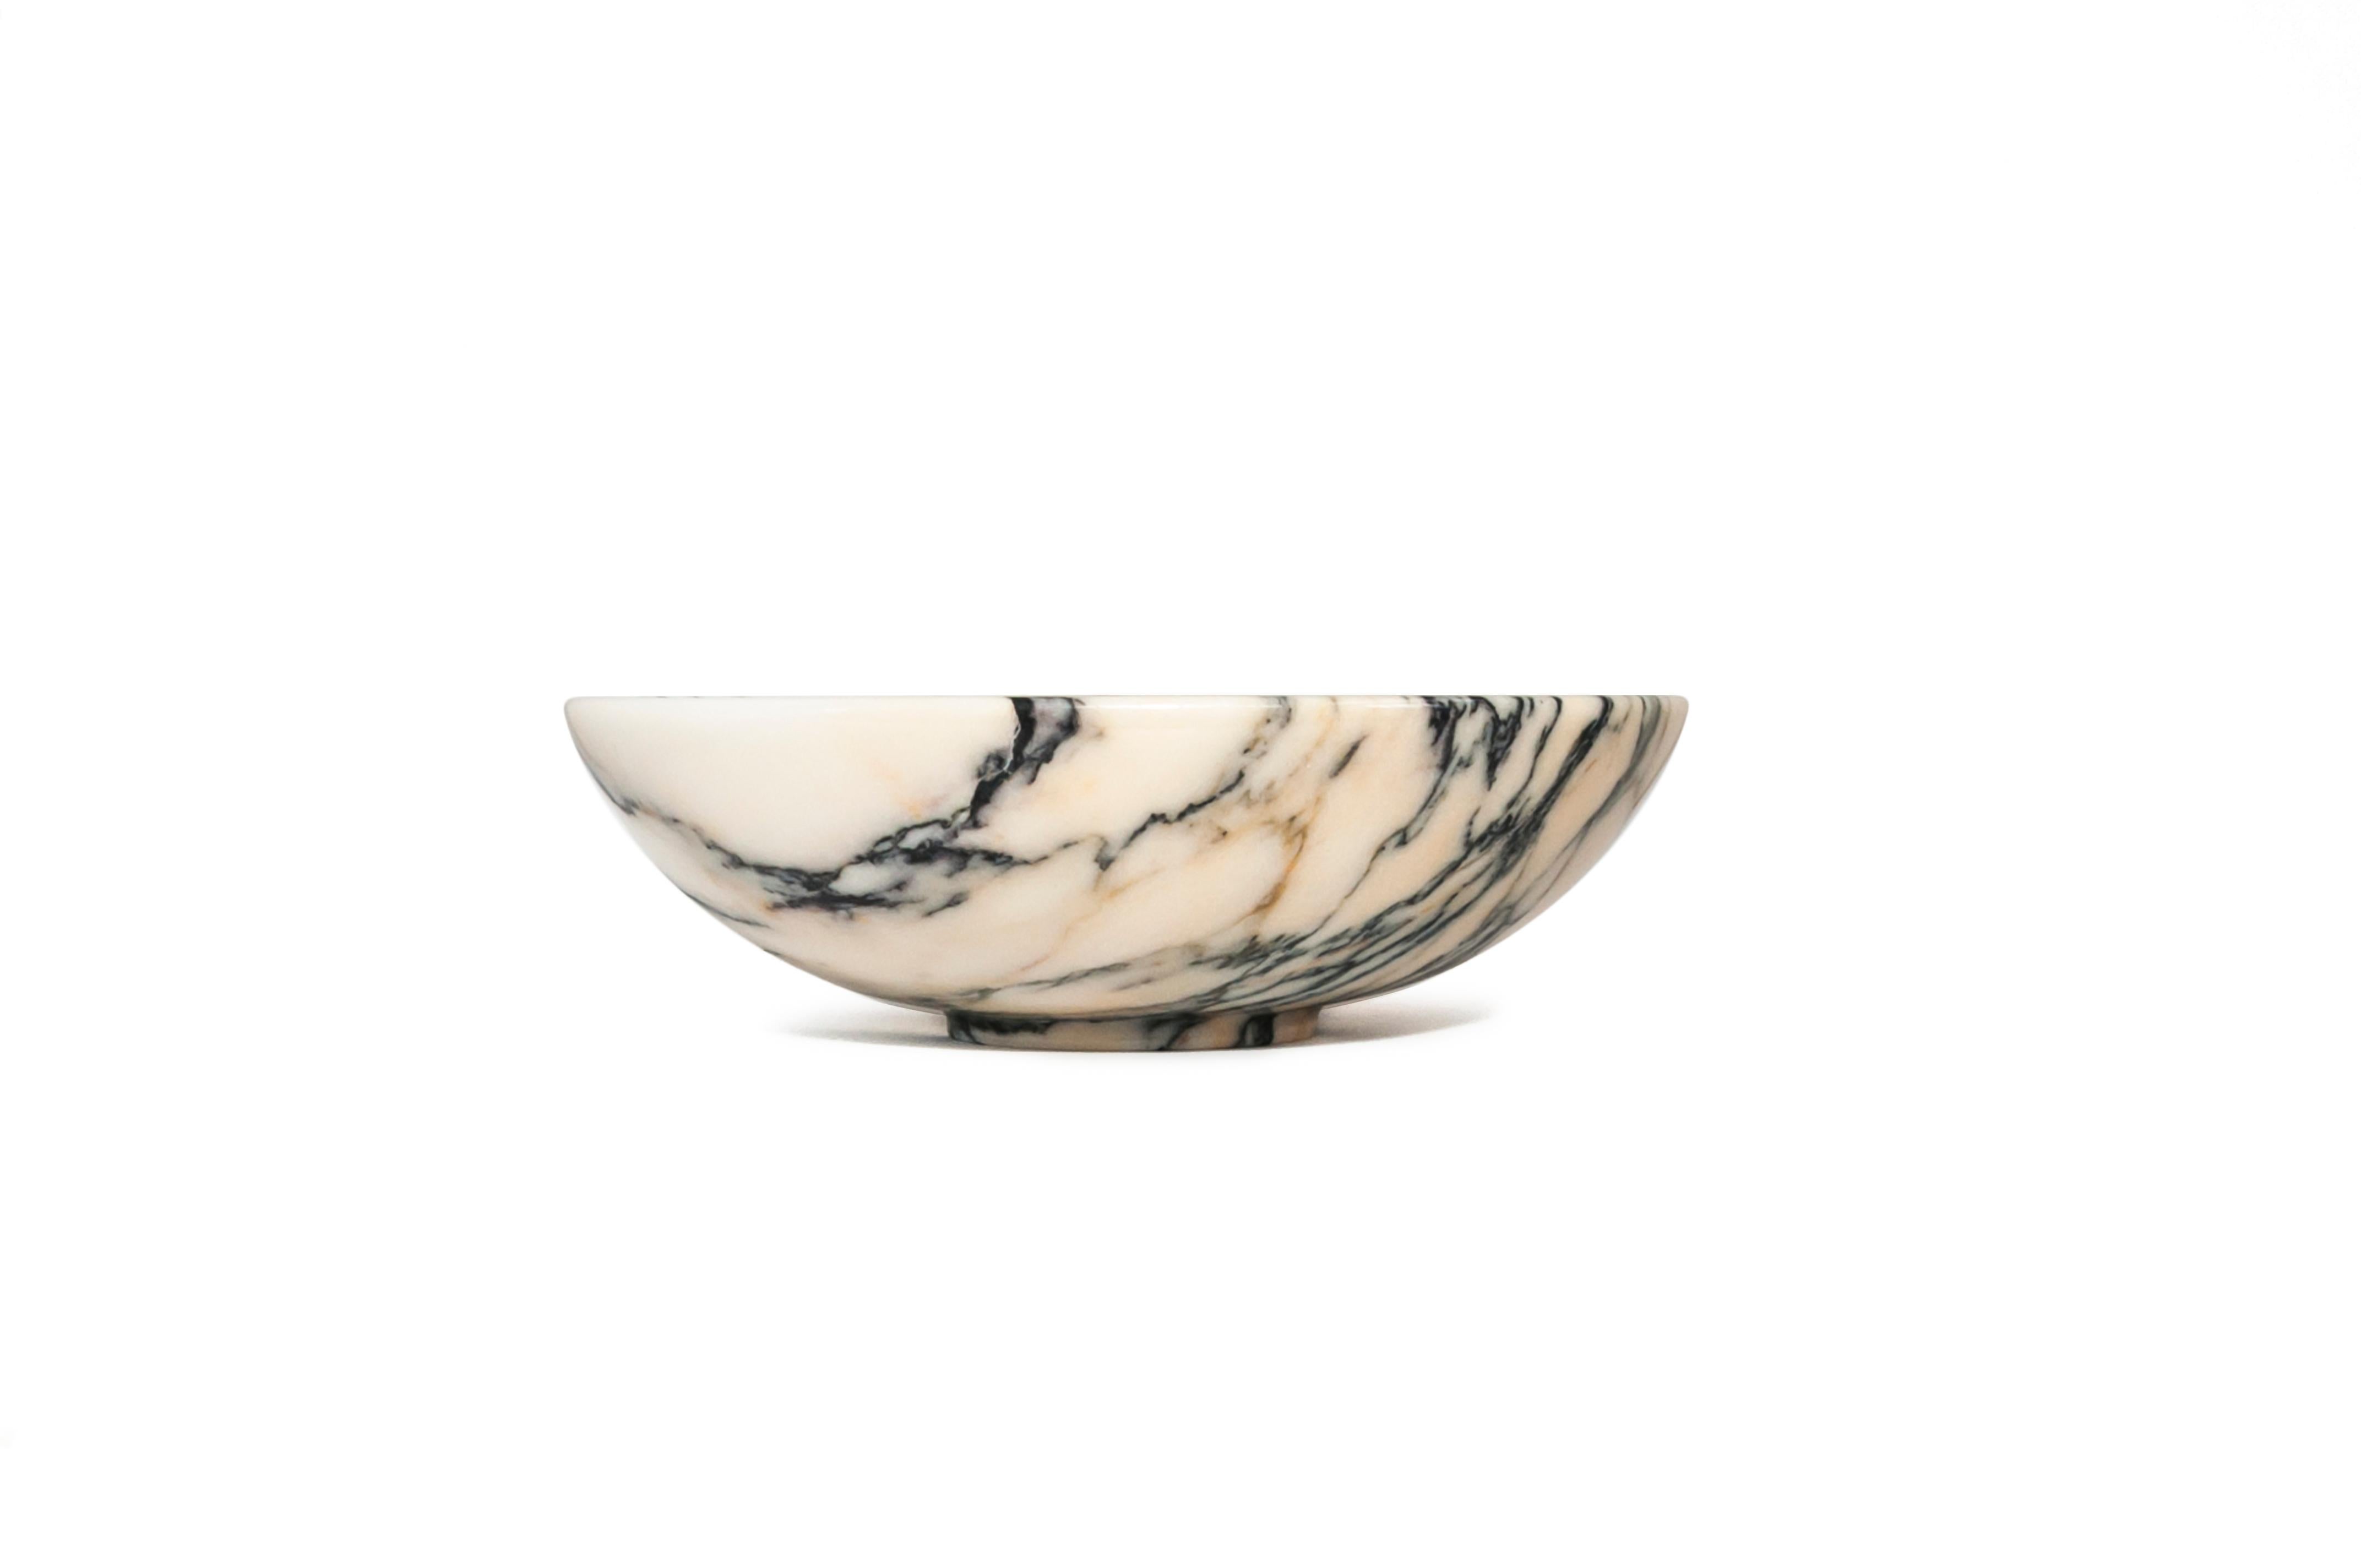 Big fruit bowl in Paonazzo marble, extracted and processed in Carrara, Italy. You have a 100% made in Italy product. Measures: 30 cm diameter.
It is ideal for fruit and to present food.
Each piece is in a way unique (every marble block is